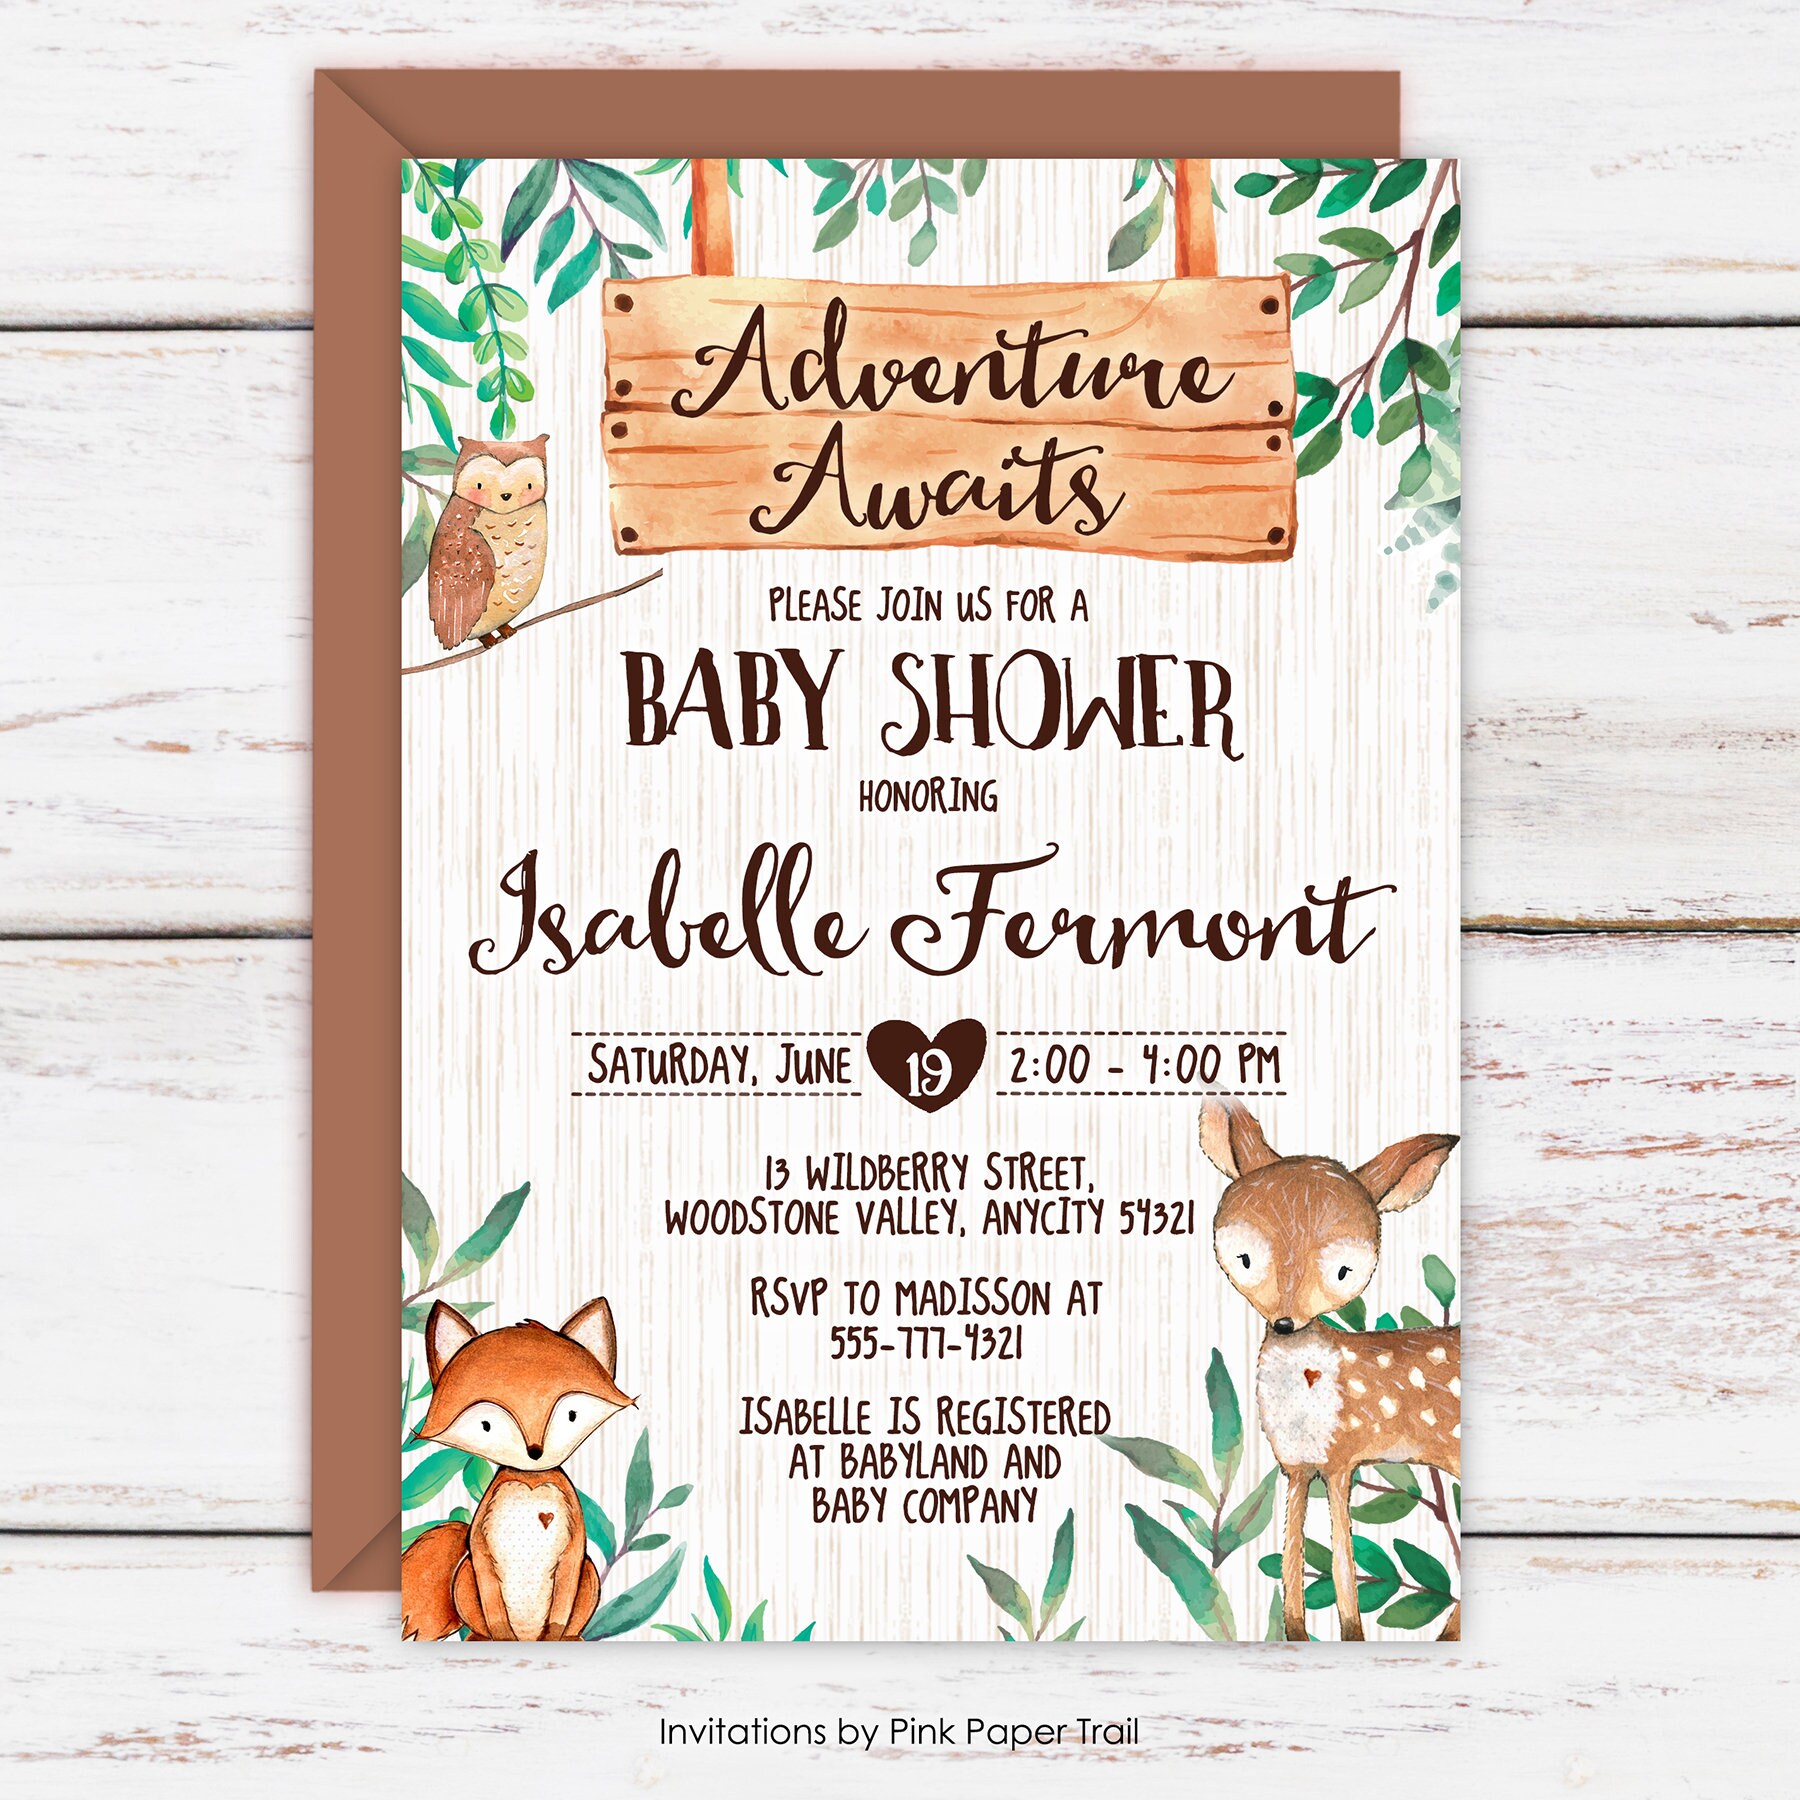 Girl or Boy Your choice of Quantity and Envelope Color Personalized Woodland Animals Baby Shower Invitations Adventure Awaits Boho Rustic Theme 